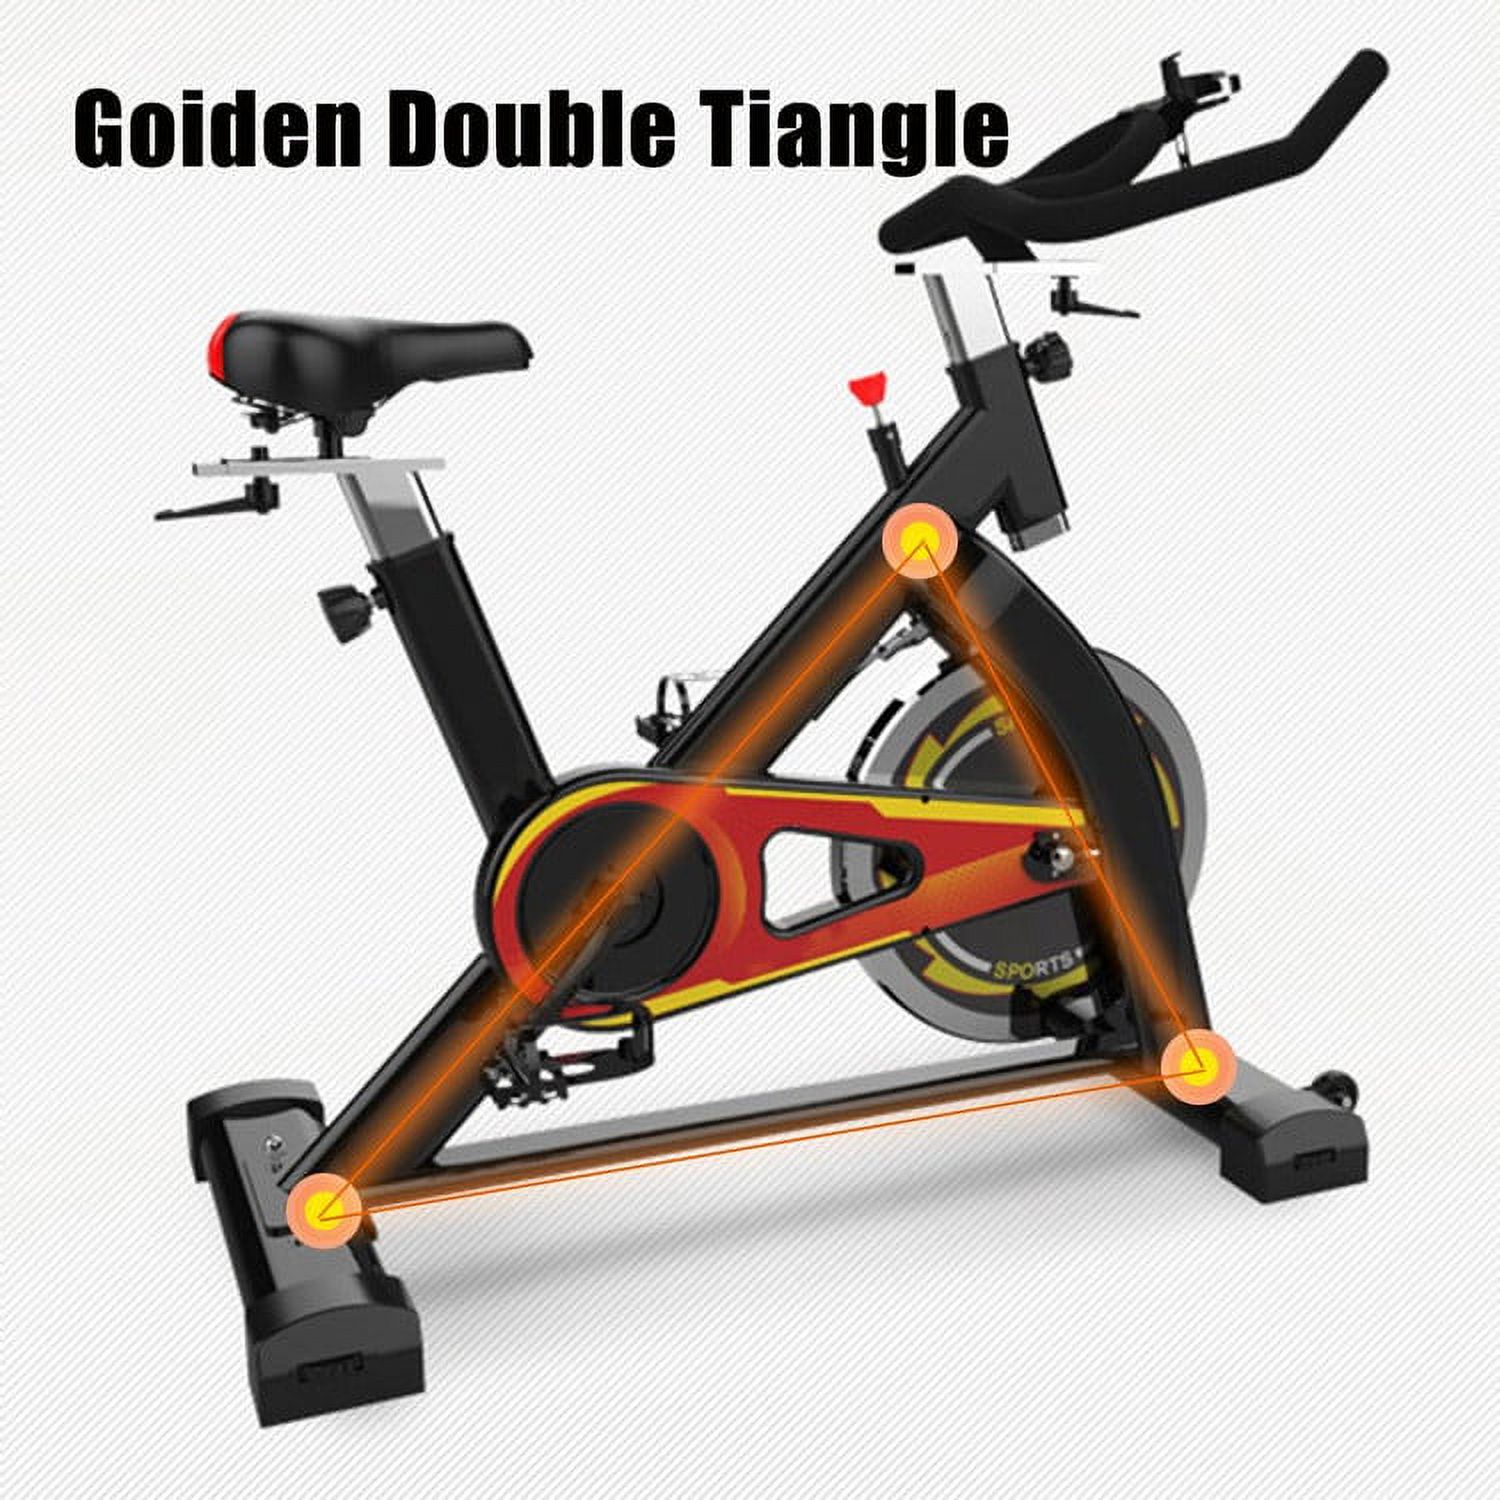 Stationary Exercise Bicycle Trainer Fitness Cardio Aerobic Exercise Bicycle Trainer S500(Black) - image 4 of 6